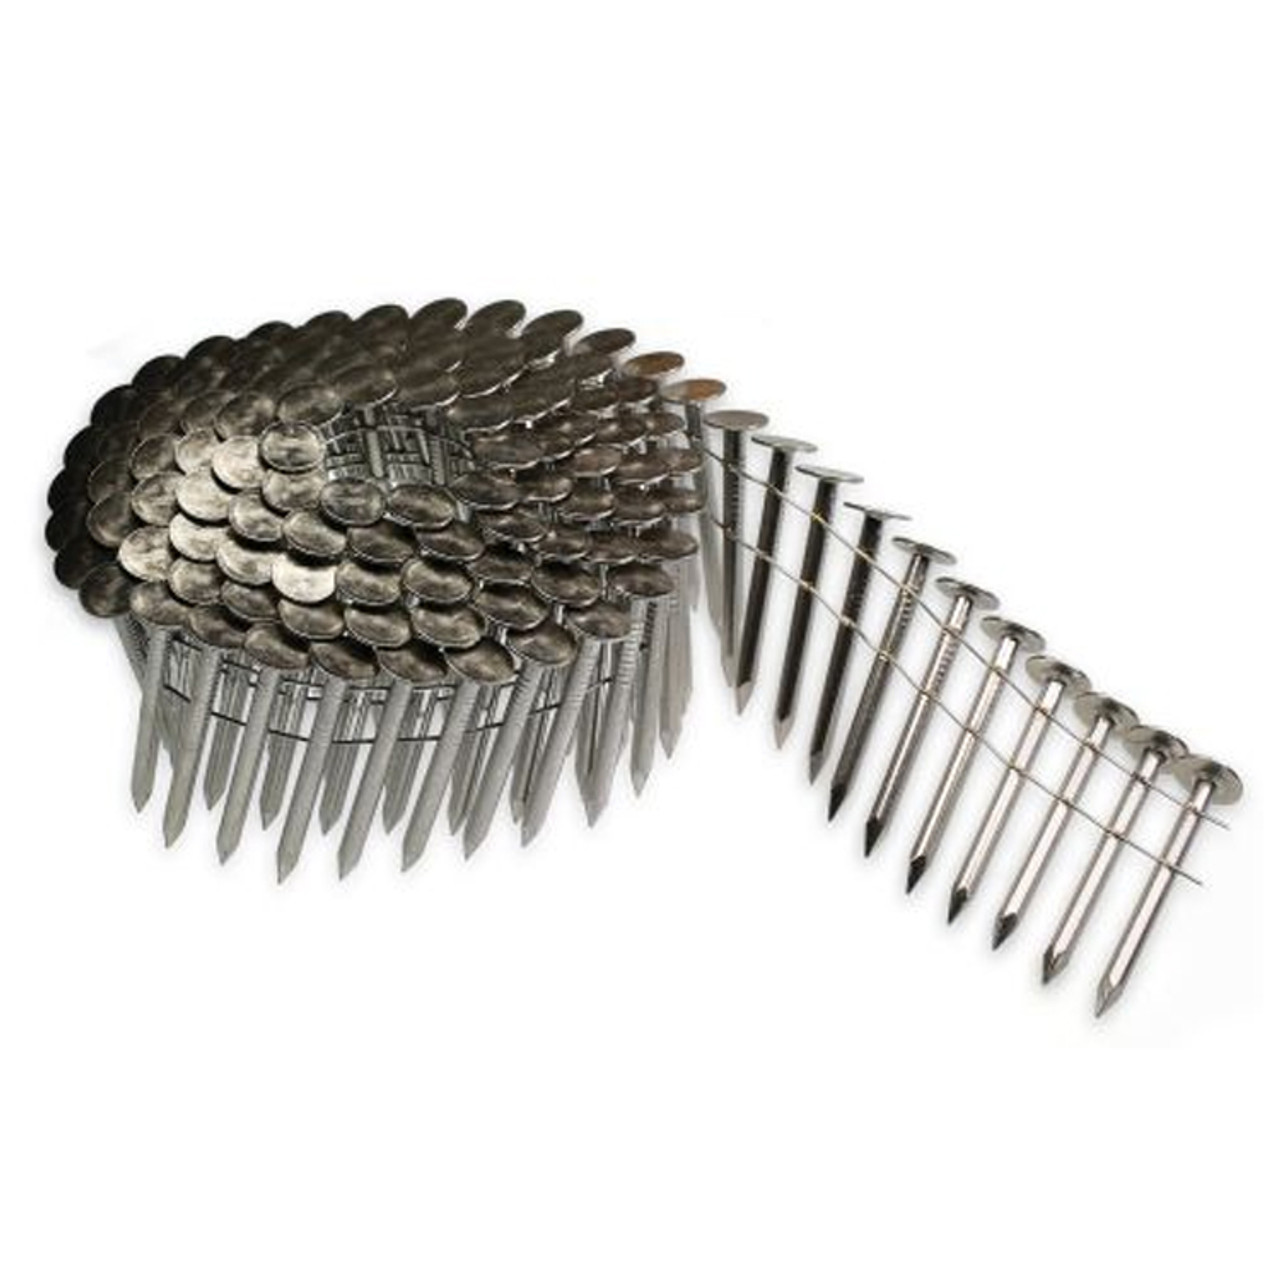 Bostitch CR2DCGAL Coil Roofing Nails 7/8 Inch Galvanized Smooth Shank 15  Degree 7200 Pack: Pneumatic Coil Roofing Nails Galvanized (077914004448-1)